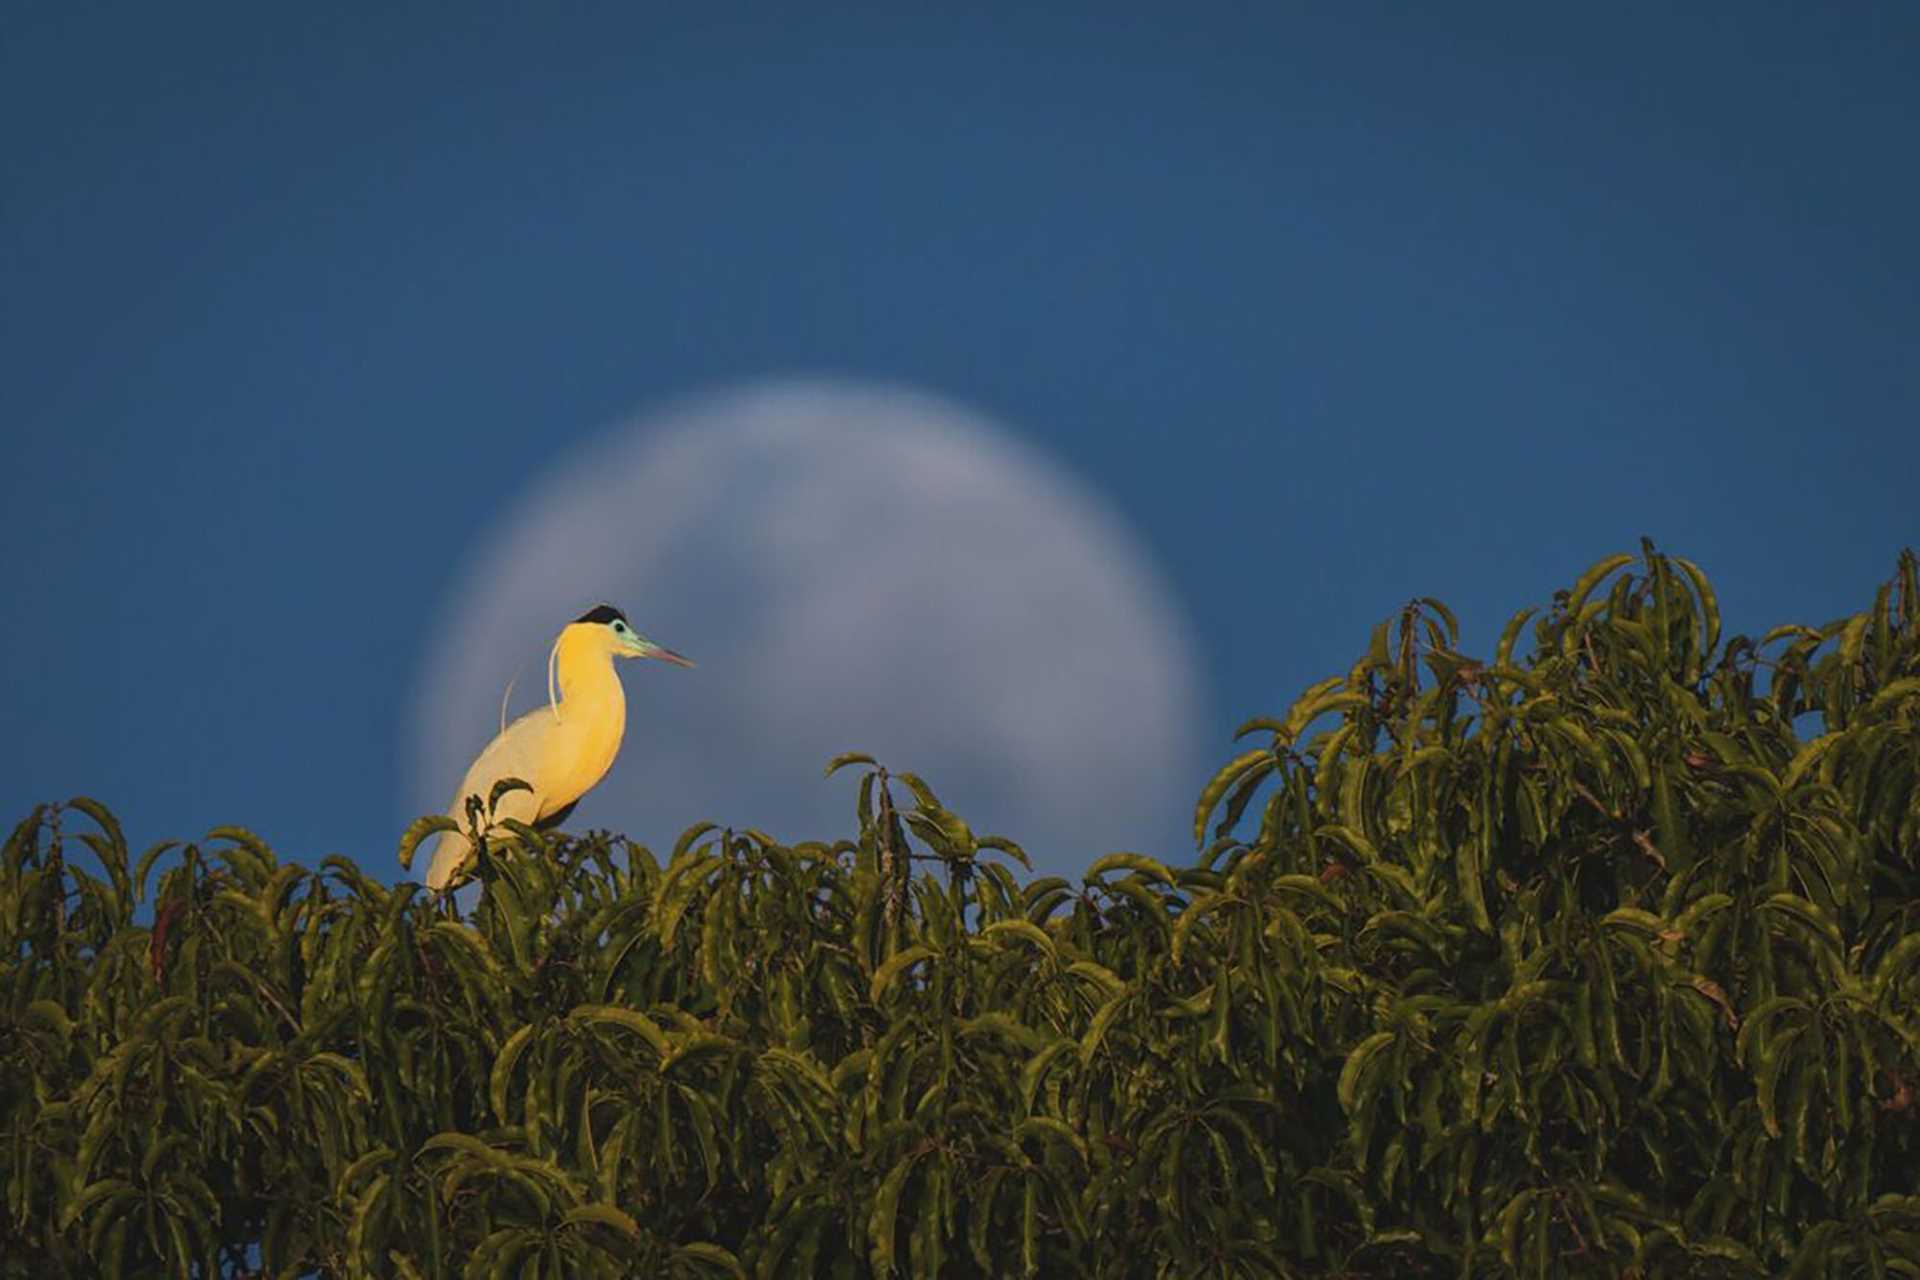 capped heron in front of full moon